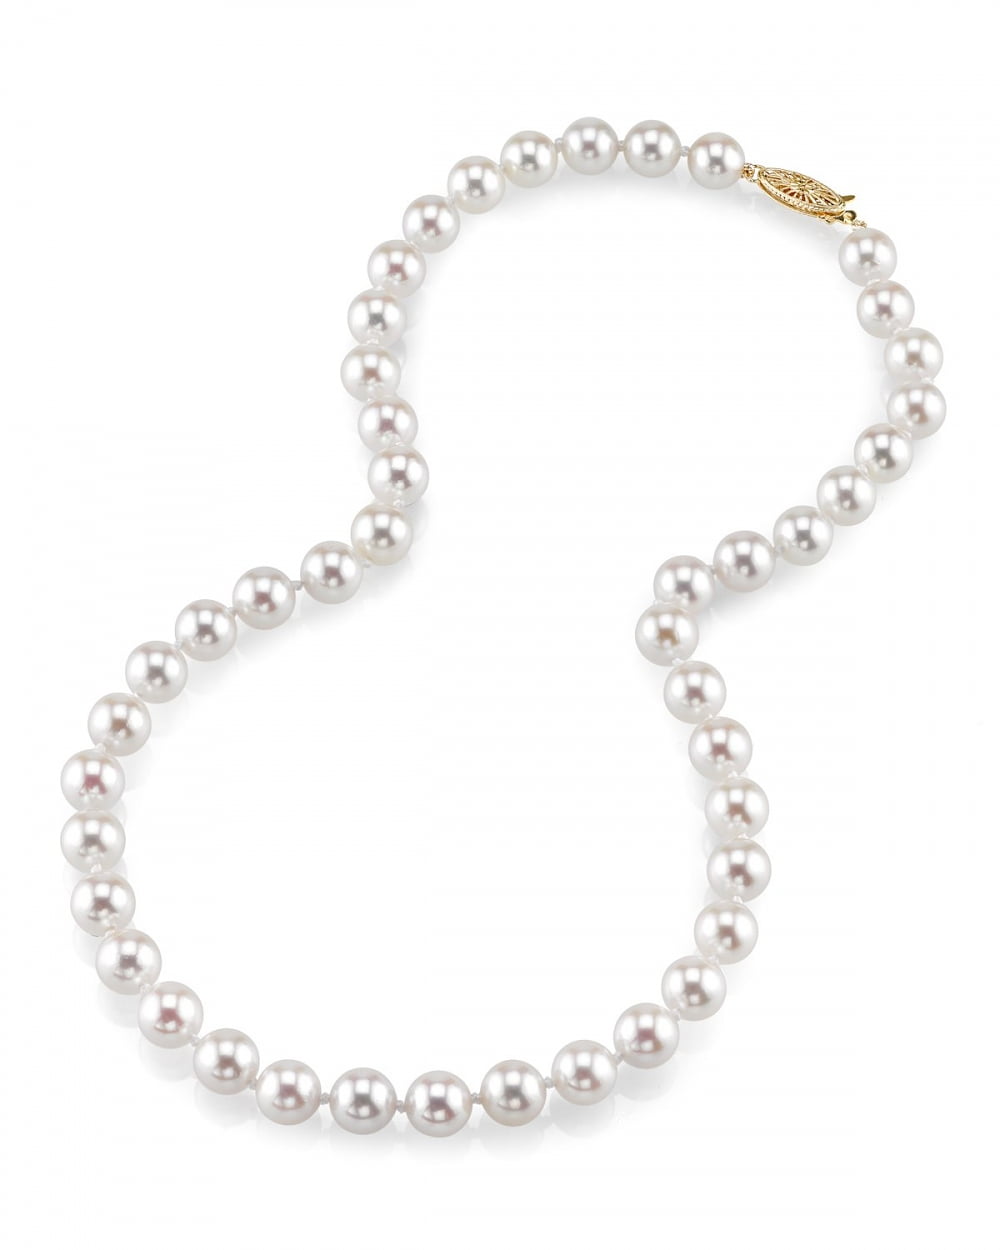 AA Quality 18 Princess Length 14K Gold 7.0-7.5mm Japanese Akoya White Cultured Pearl Necklace